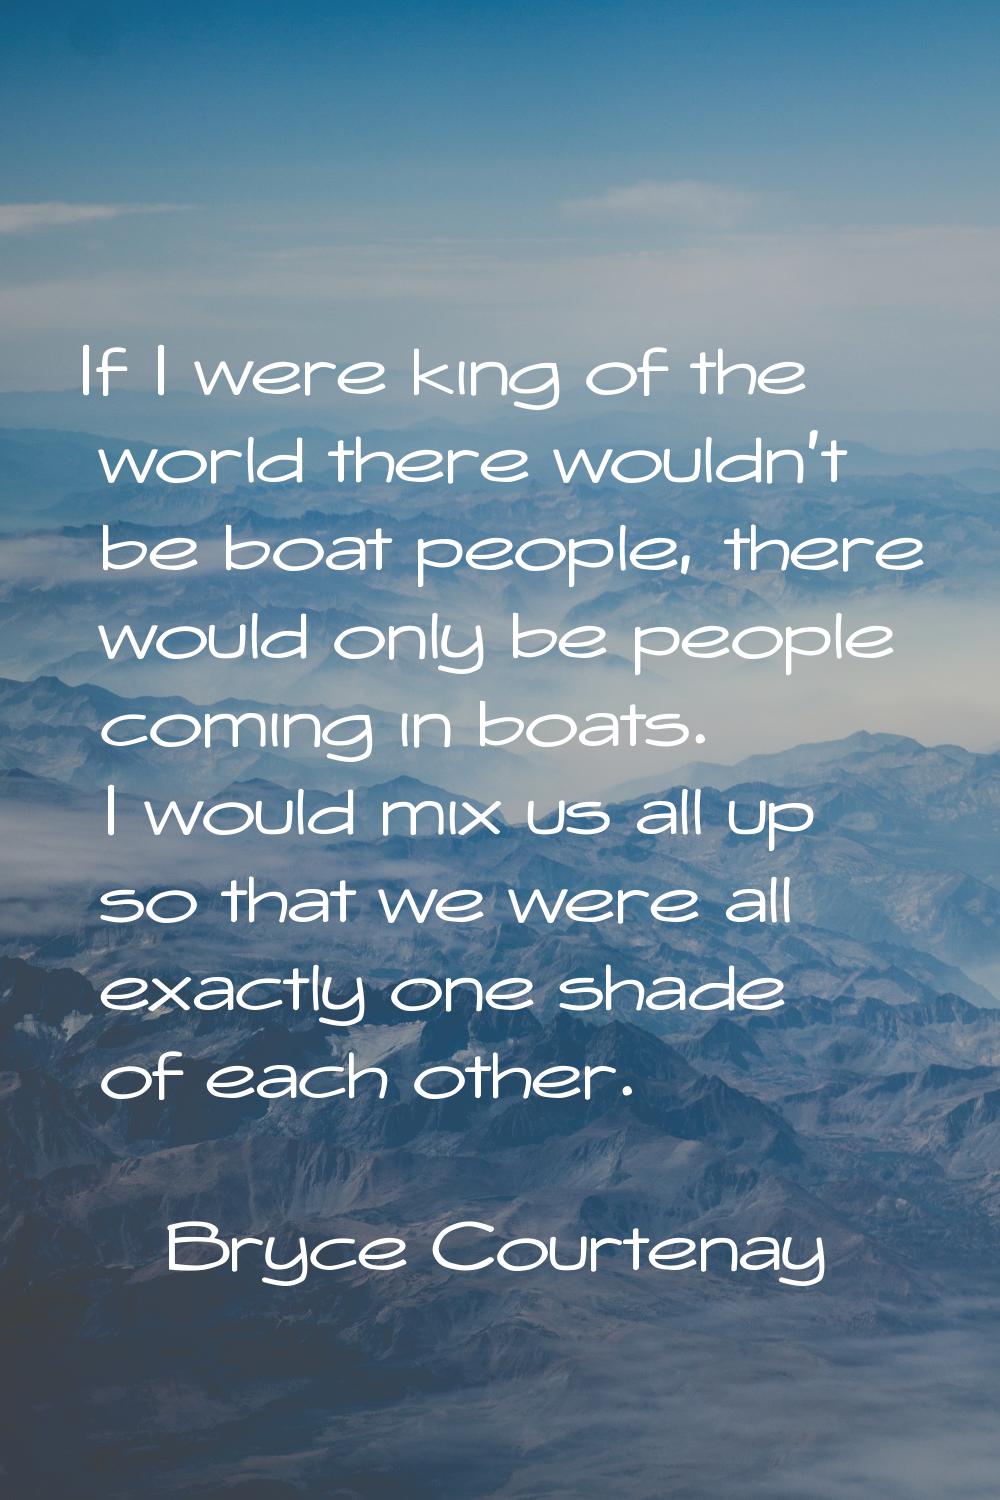 If I were king of the world there wouldn't be boat people, there would only be people coming in boa